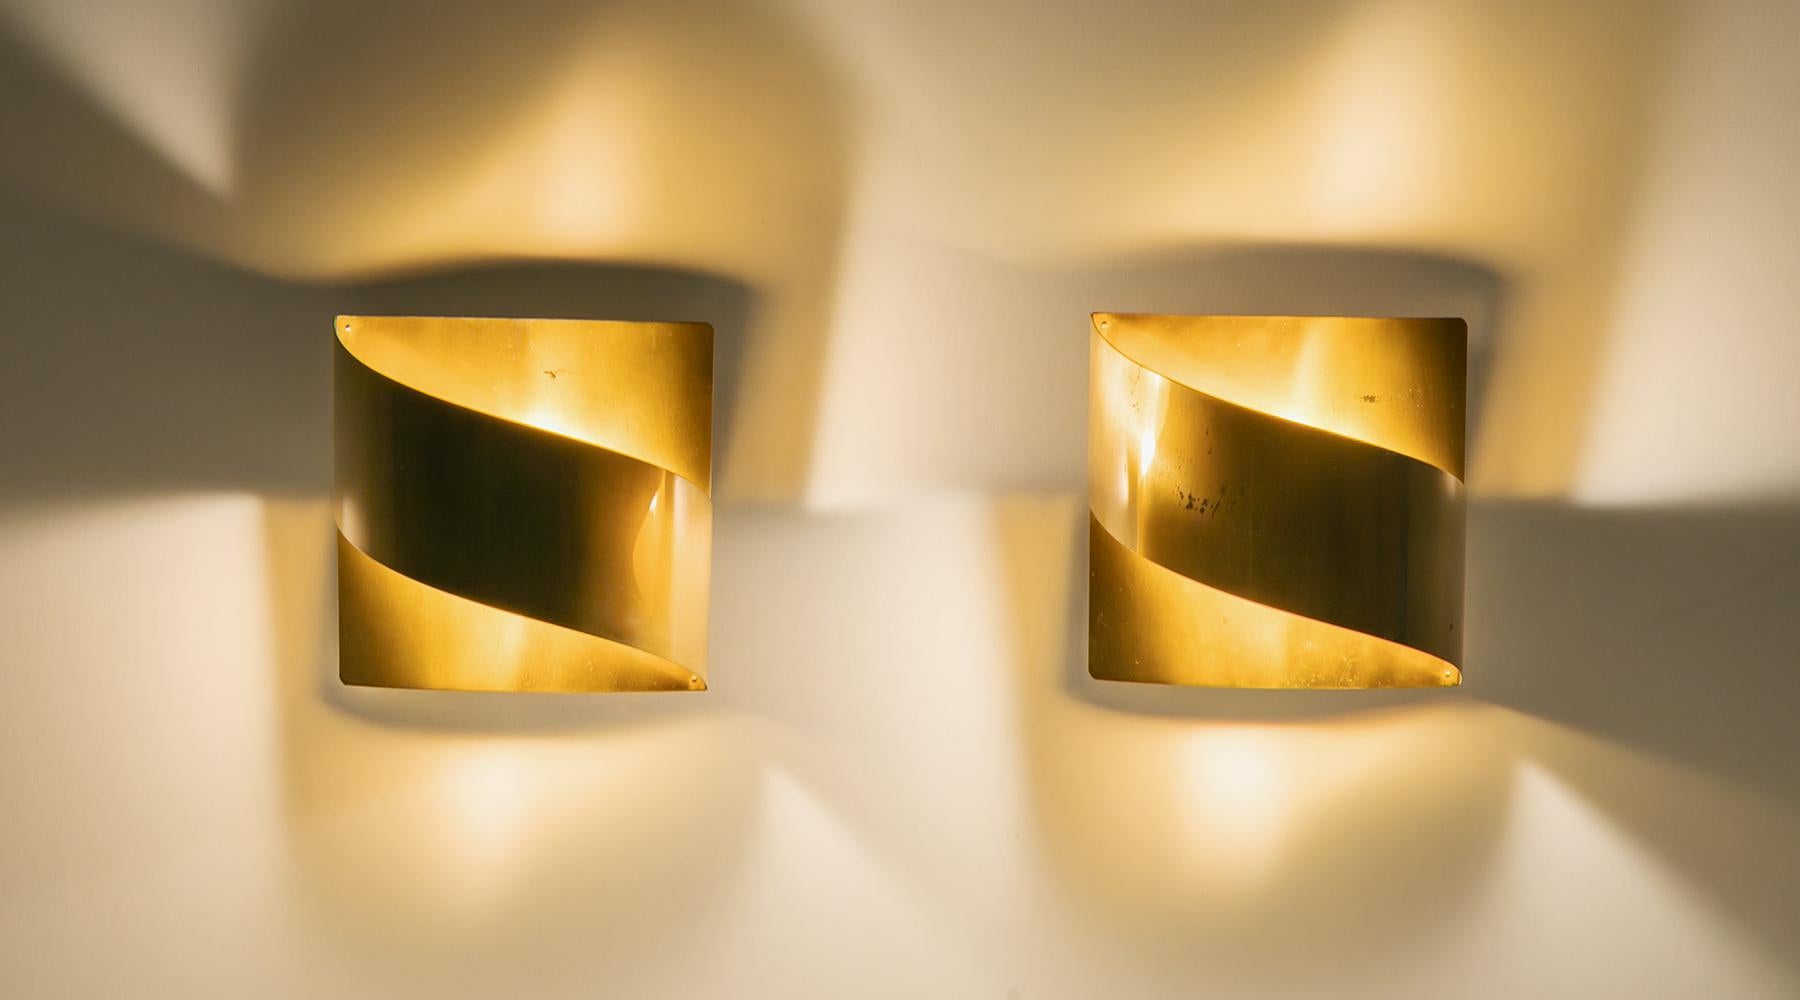 A pair of 1960s Swedish polished brass and wall lights designed by Peter Celsing for Falkenberg. 

Elegant set of brass wall-mounted lamps manufactured by Falkenberg in Sweden and designed by Peter Celsing in 1960s. The sconces gives a beautiful